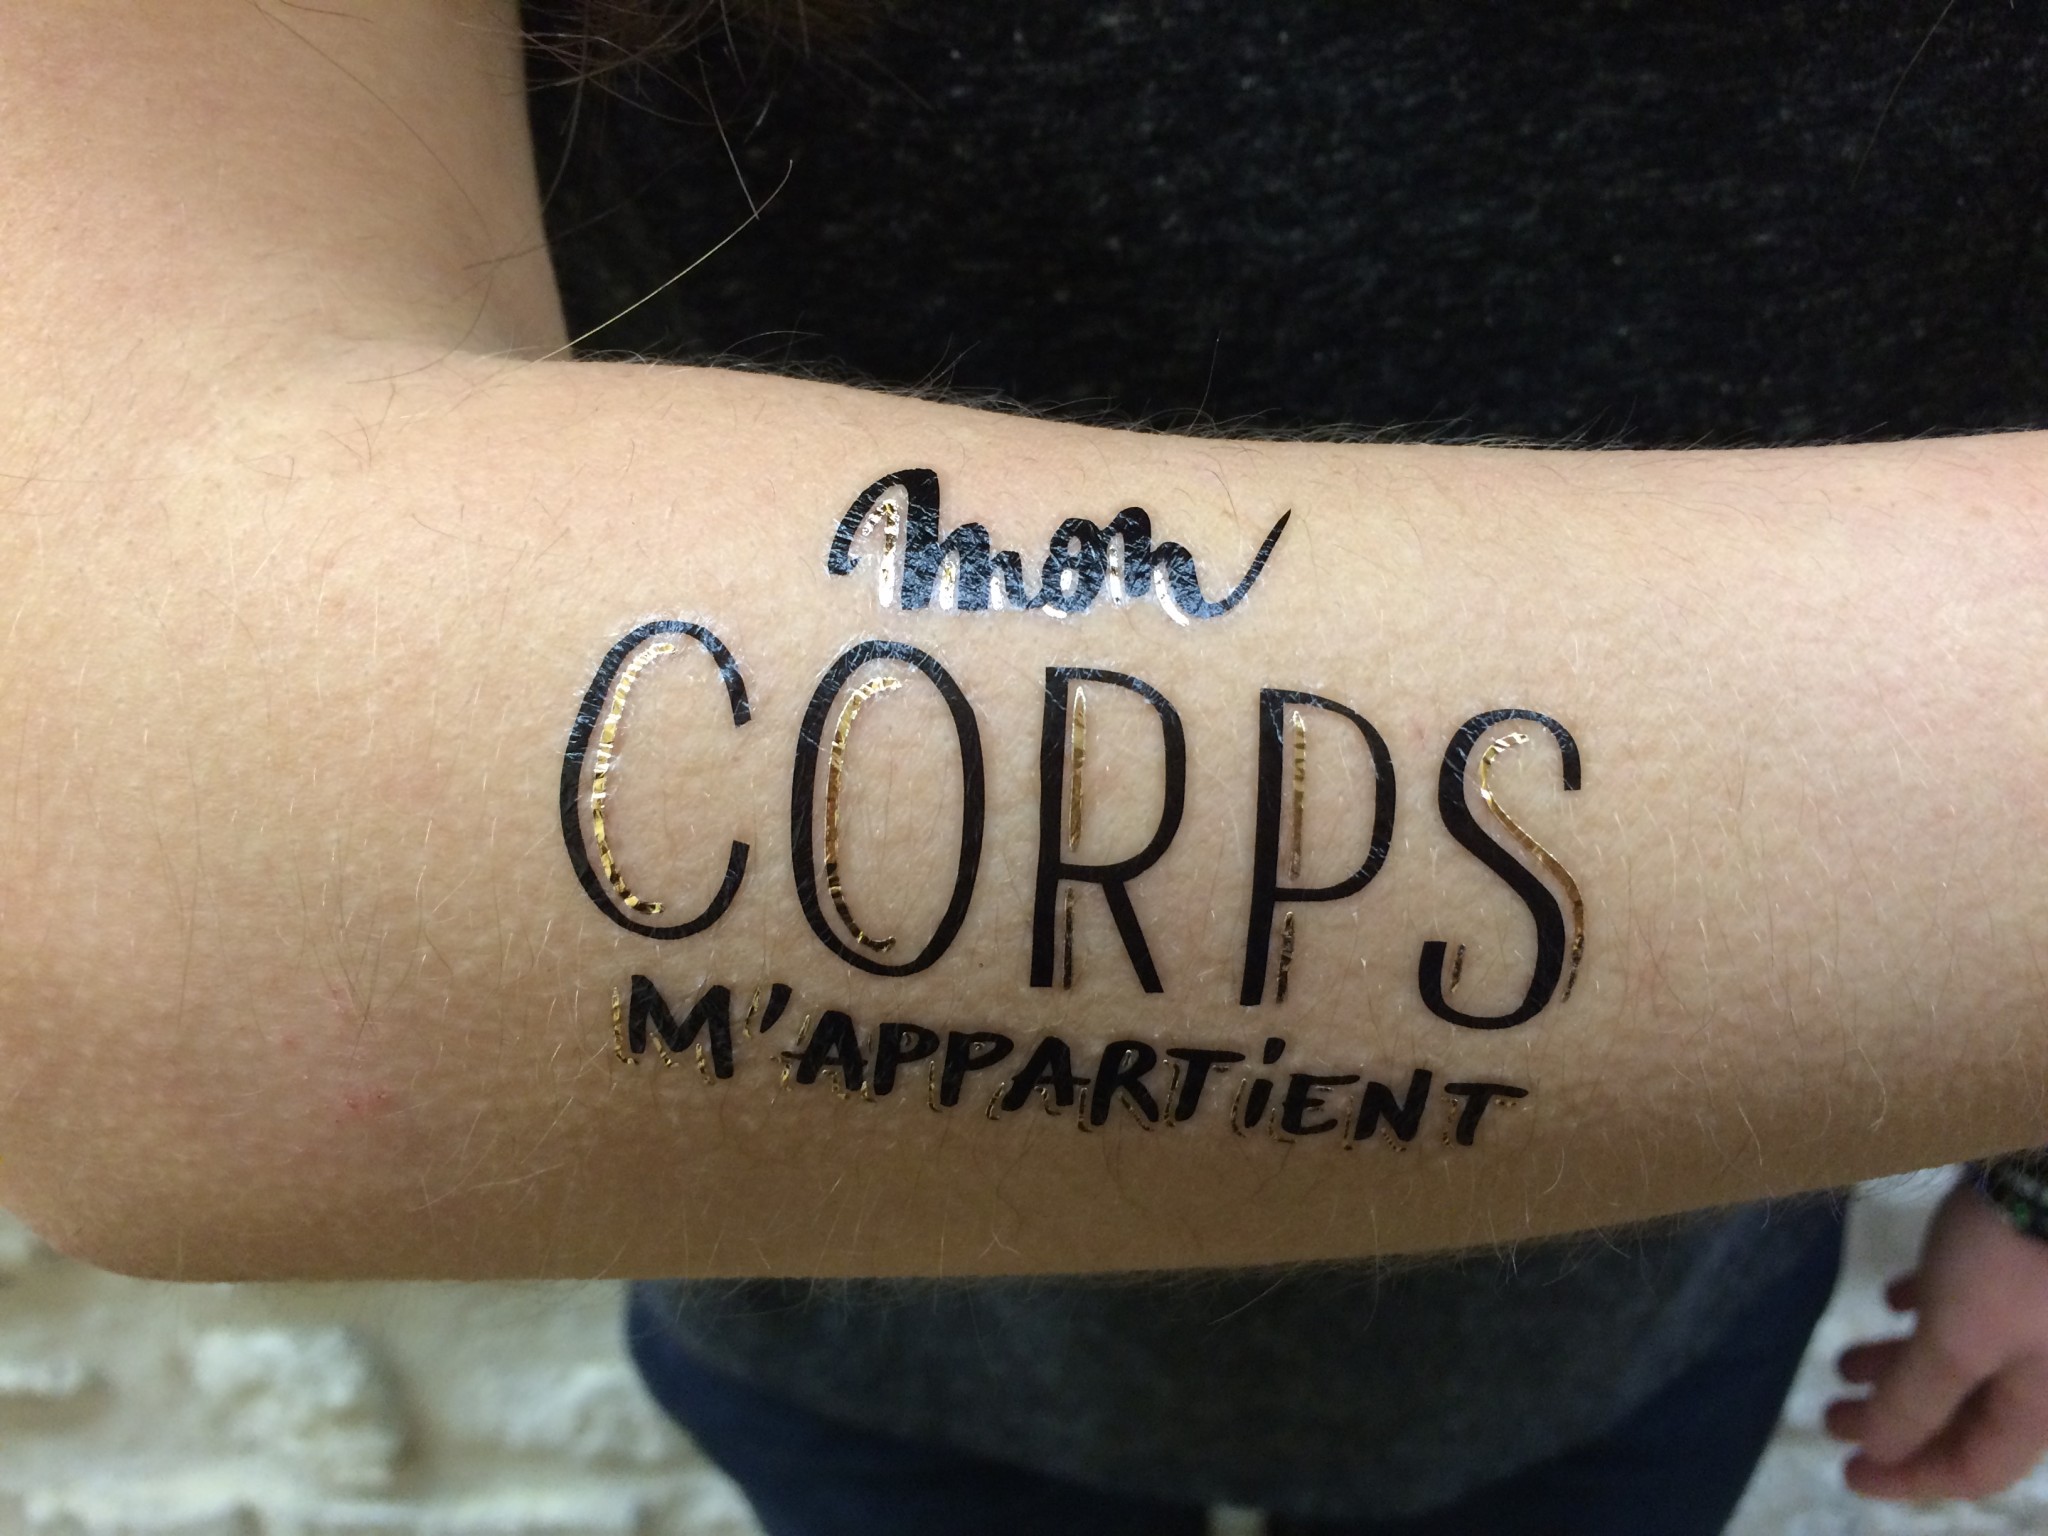 2015 10 01 mon corps mappartient